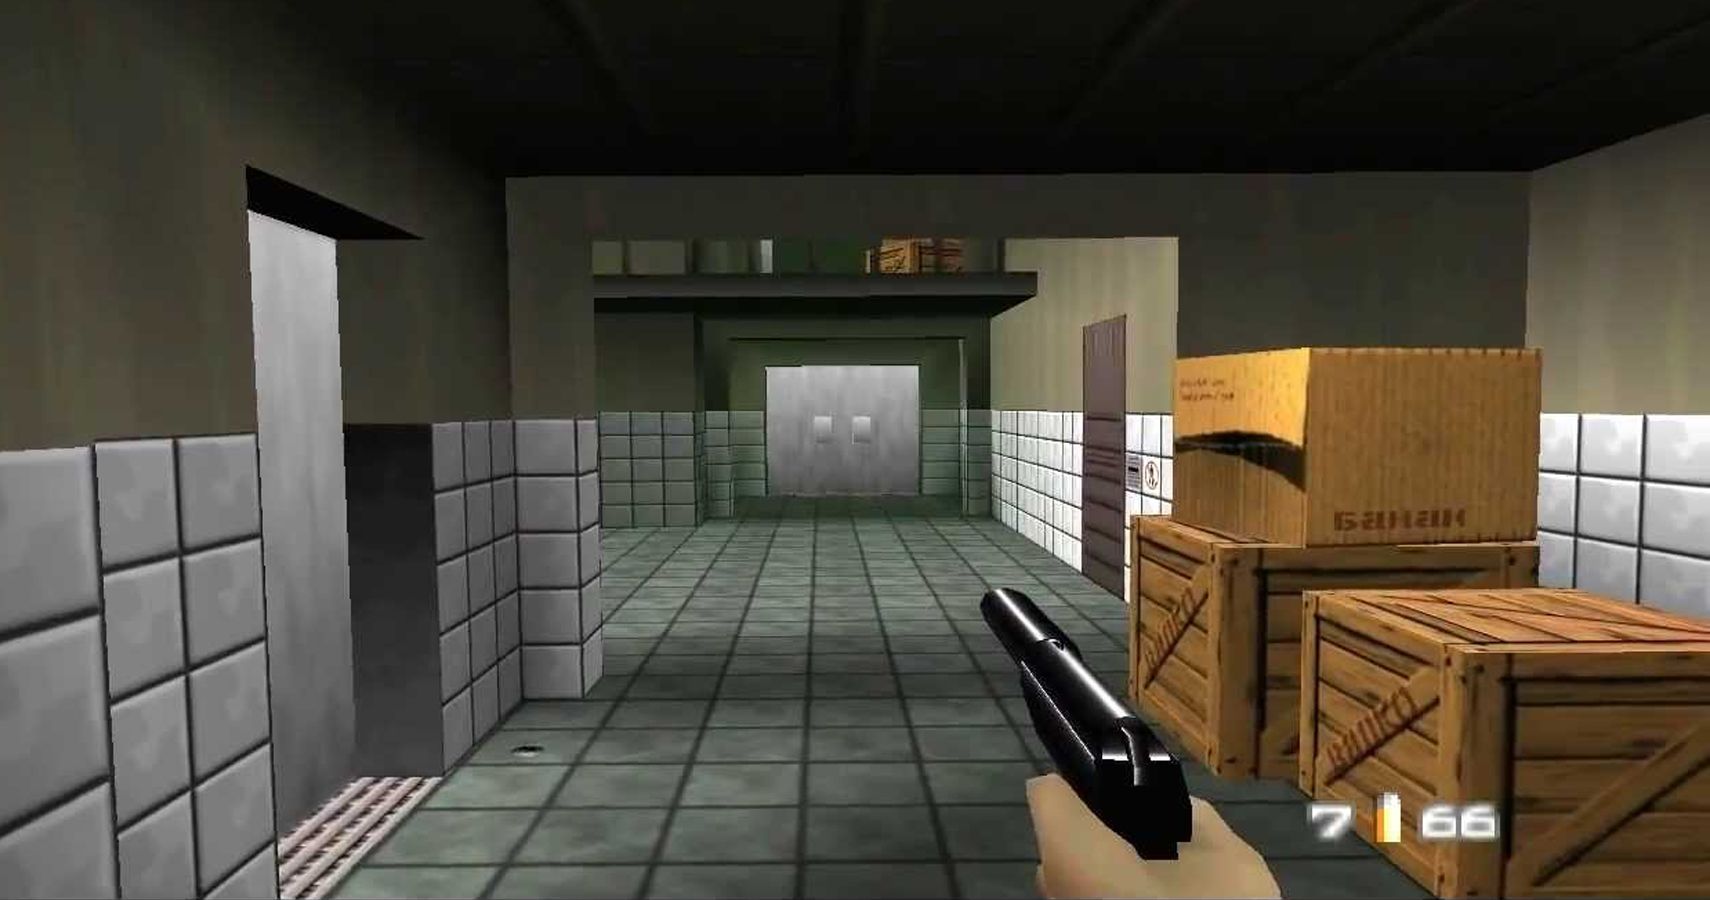 GoldenEye 007, First Hour Review